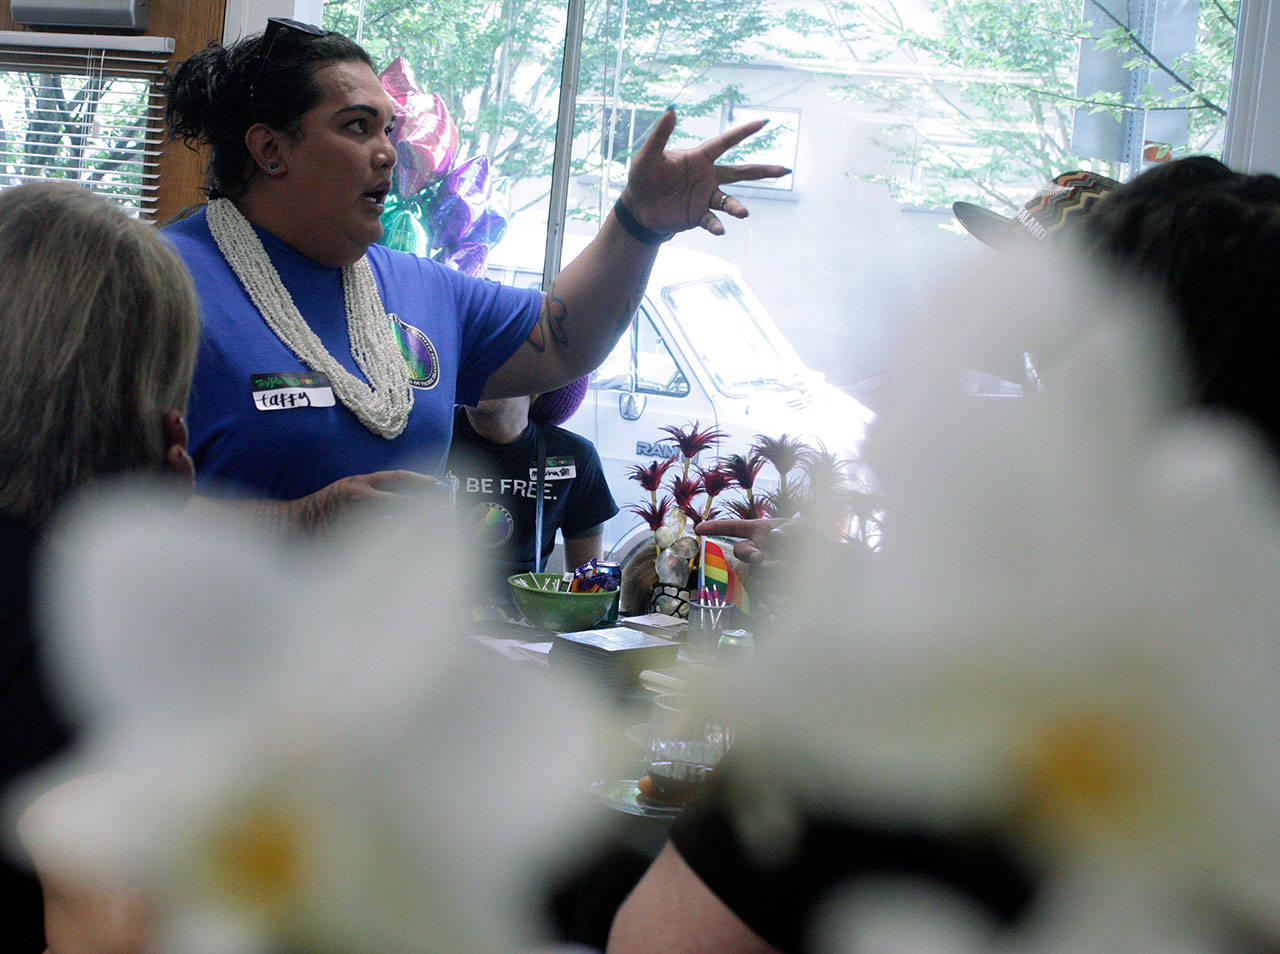 Taffy Johnson, founder and executive director of UTOPIA Seattle (United Territories of Pacific Islanders Alliance), entertains guests at the grand opening of the organization’s downtown Kent center last Saturday. MARK KLAAS, Kent Reporter